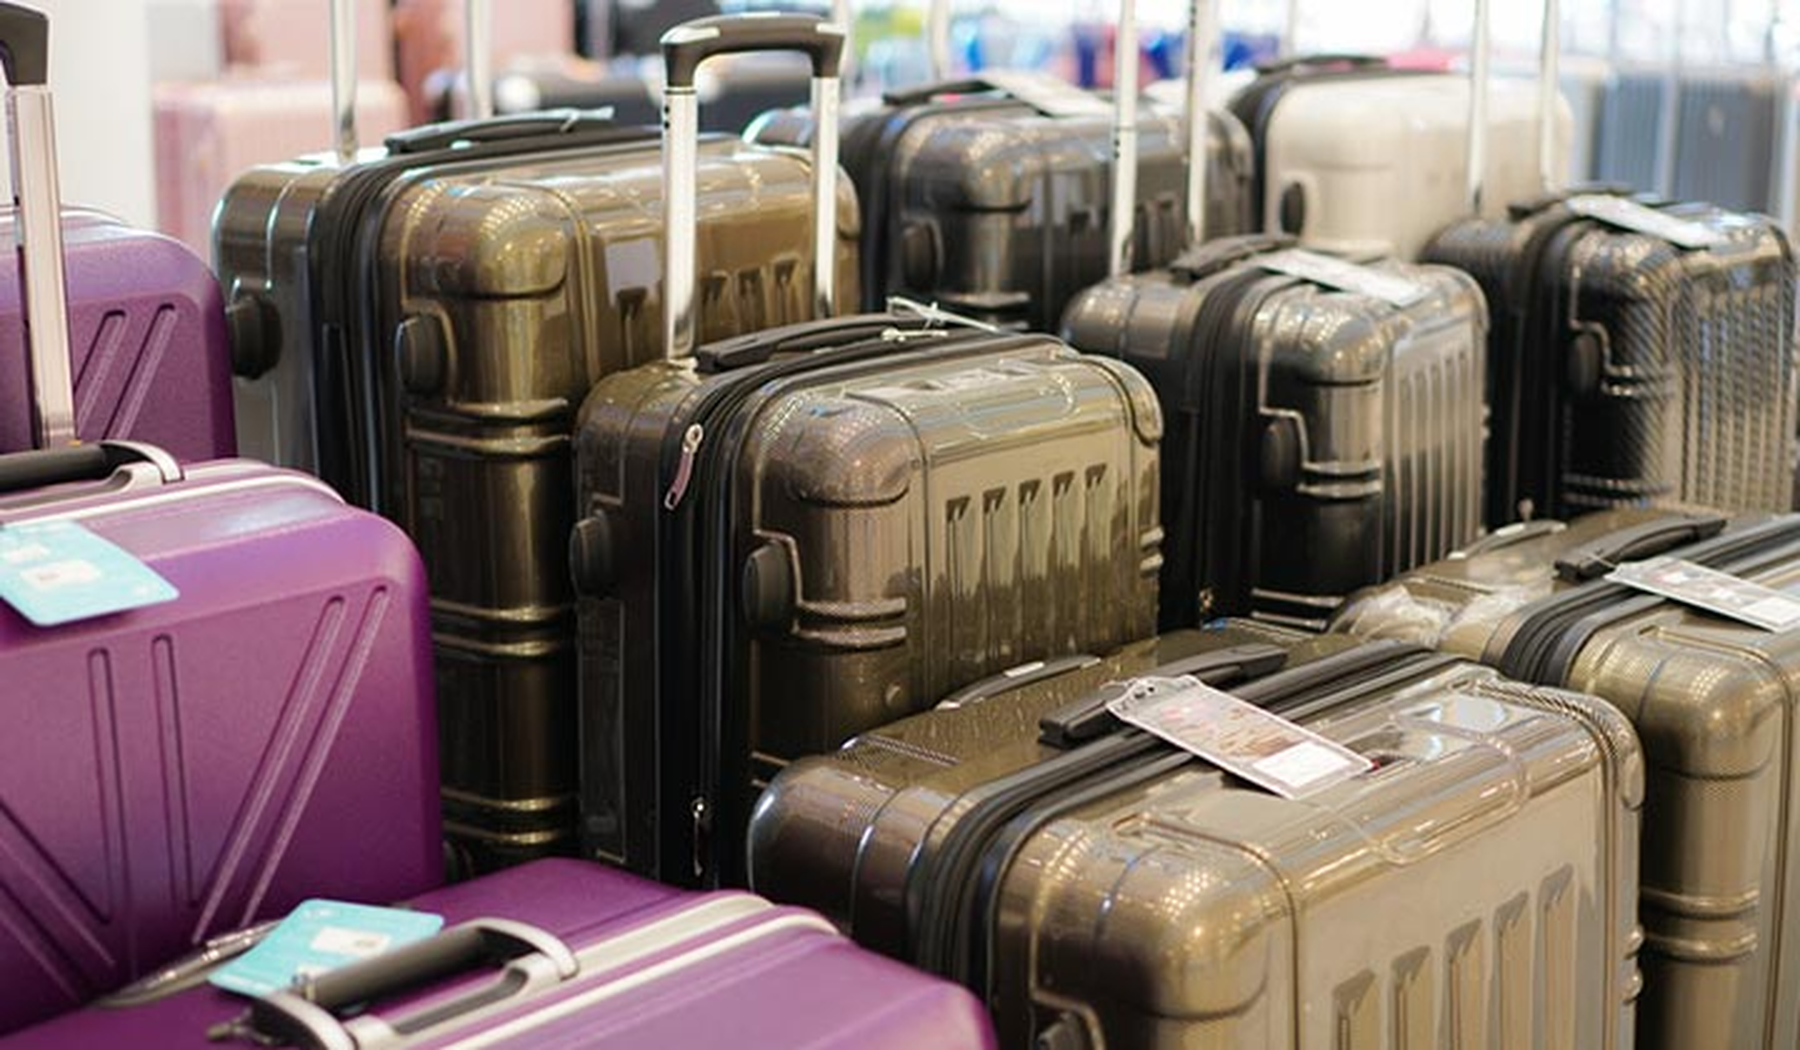 Rows of luggage in a store